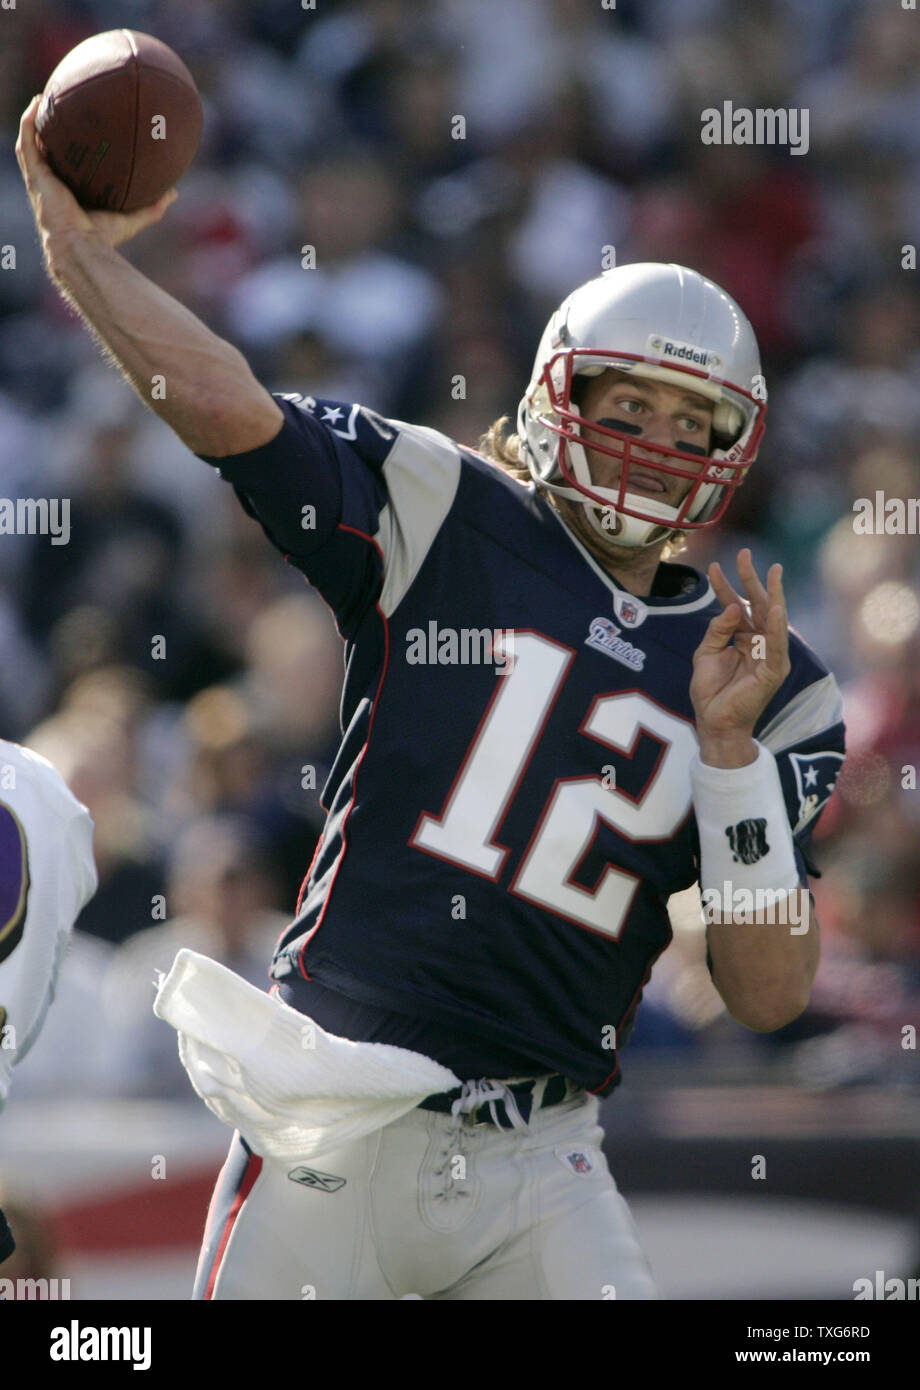 New England Patriots quarterback Tom Brady (12) throws a pass in the second quarter against the Baltimore Ravens at Gillette Stadium in Foxboro, Massachusetts on October 17, 2010.    UPI/Matthew Healey Stock Photo